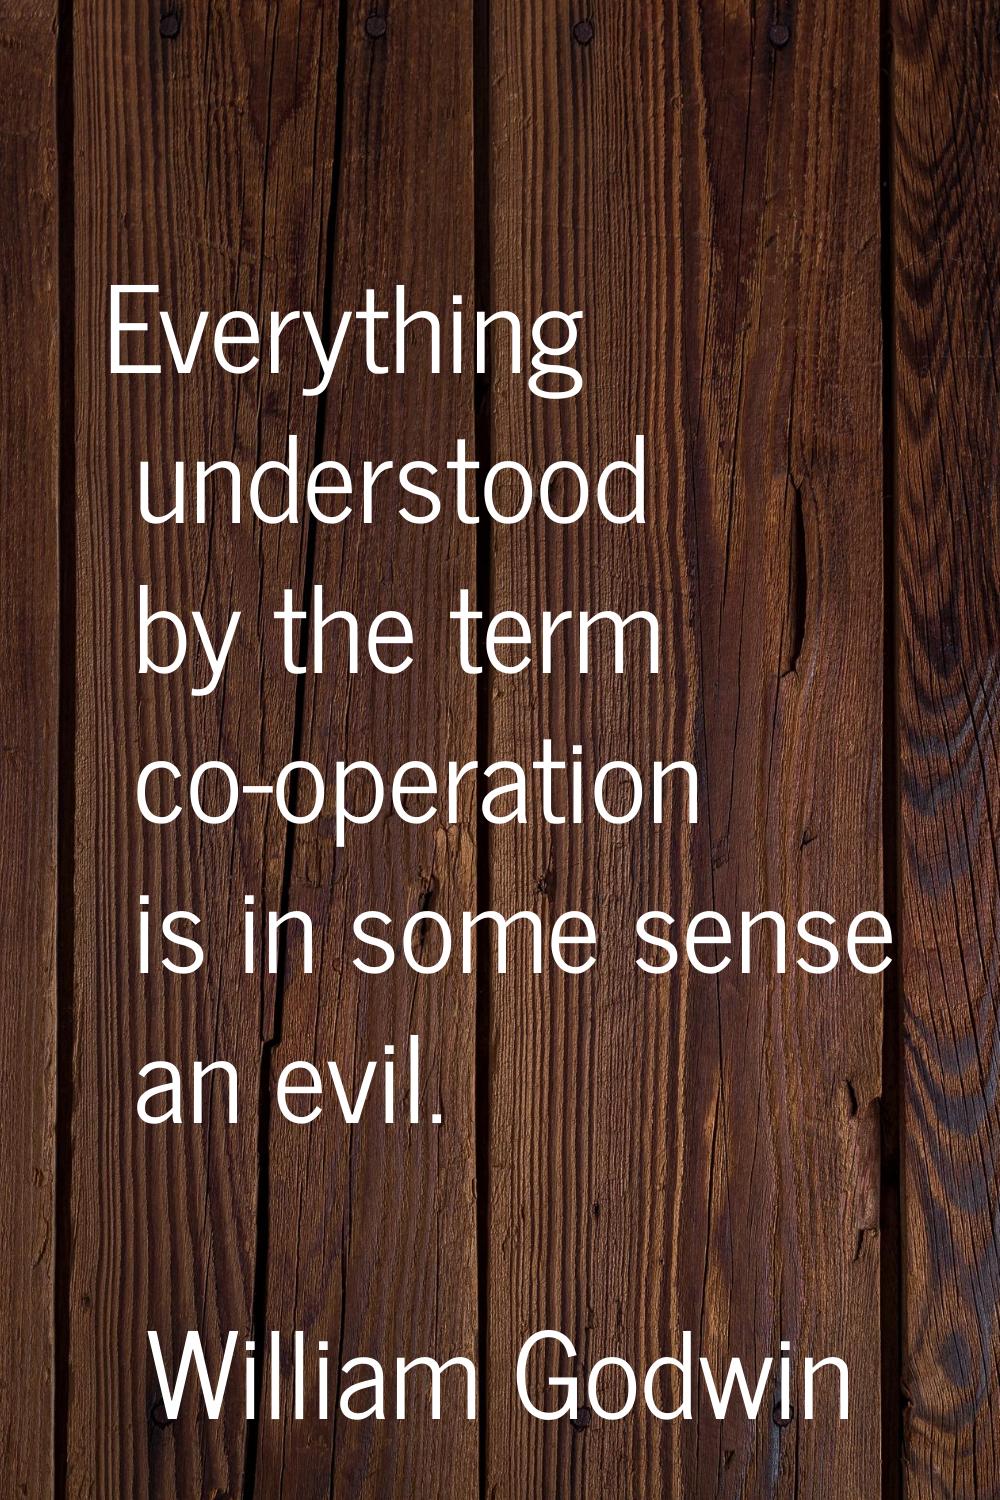 Everything understood by the term co-operation is in some sense an evil.